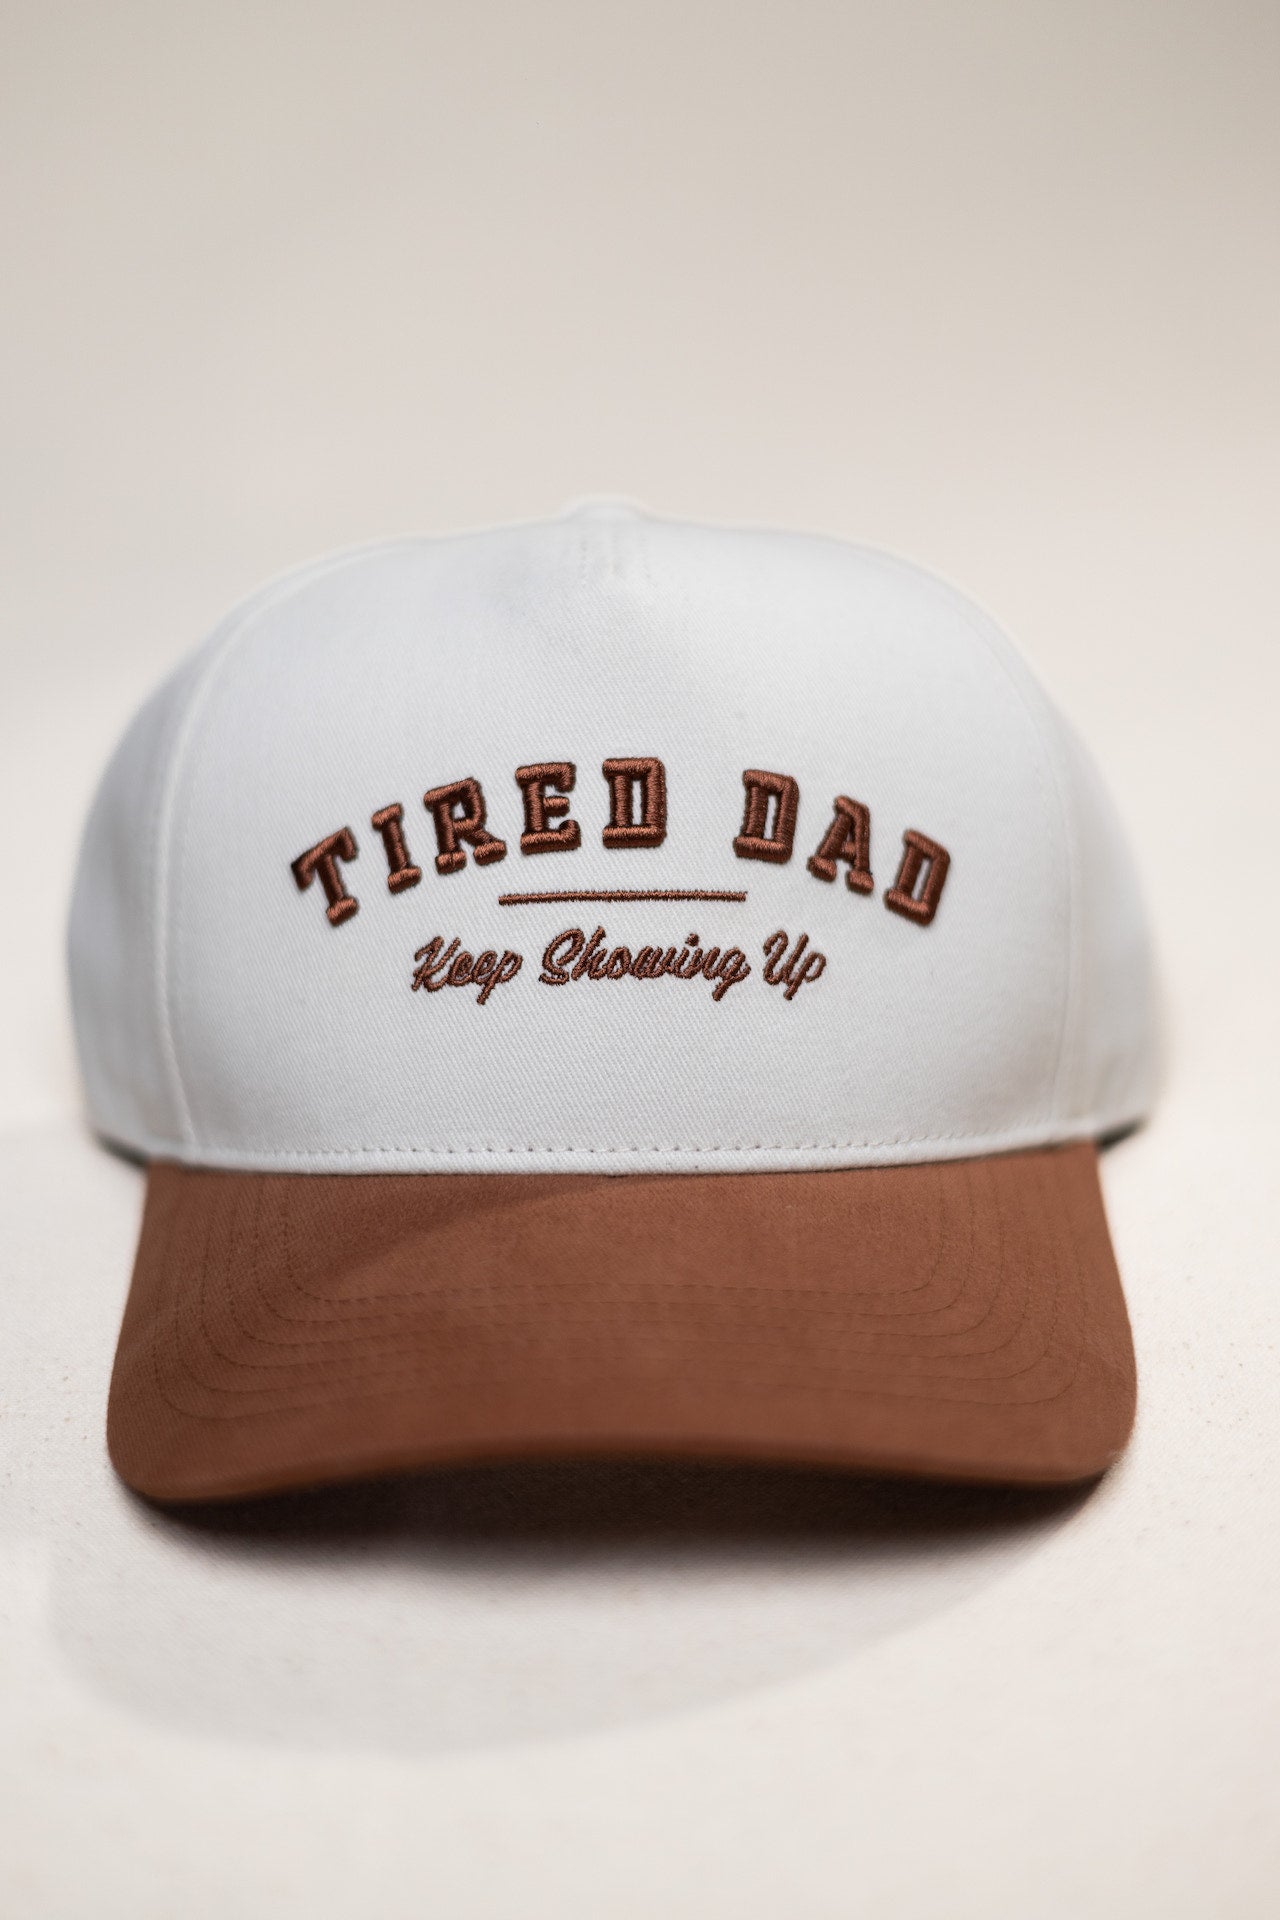 Tired Dad // Keep Showing Up // White & Brown Snapback